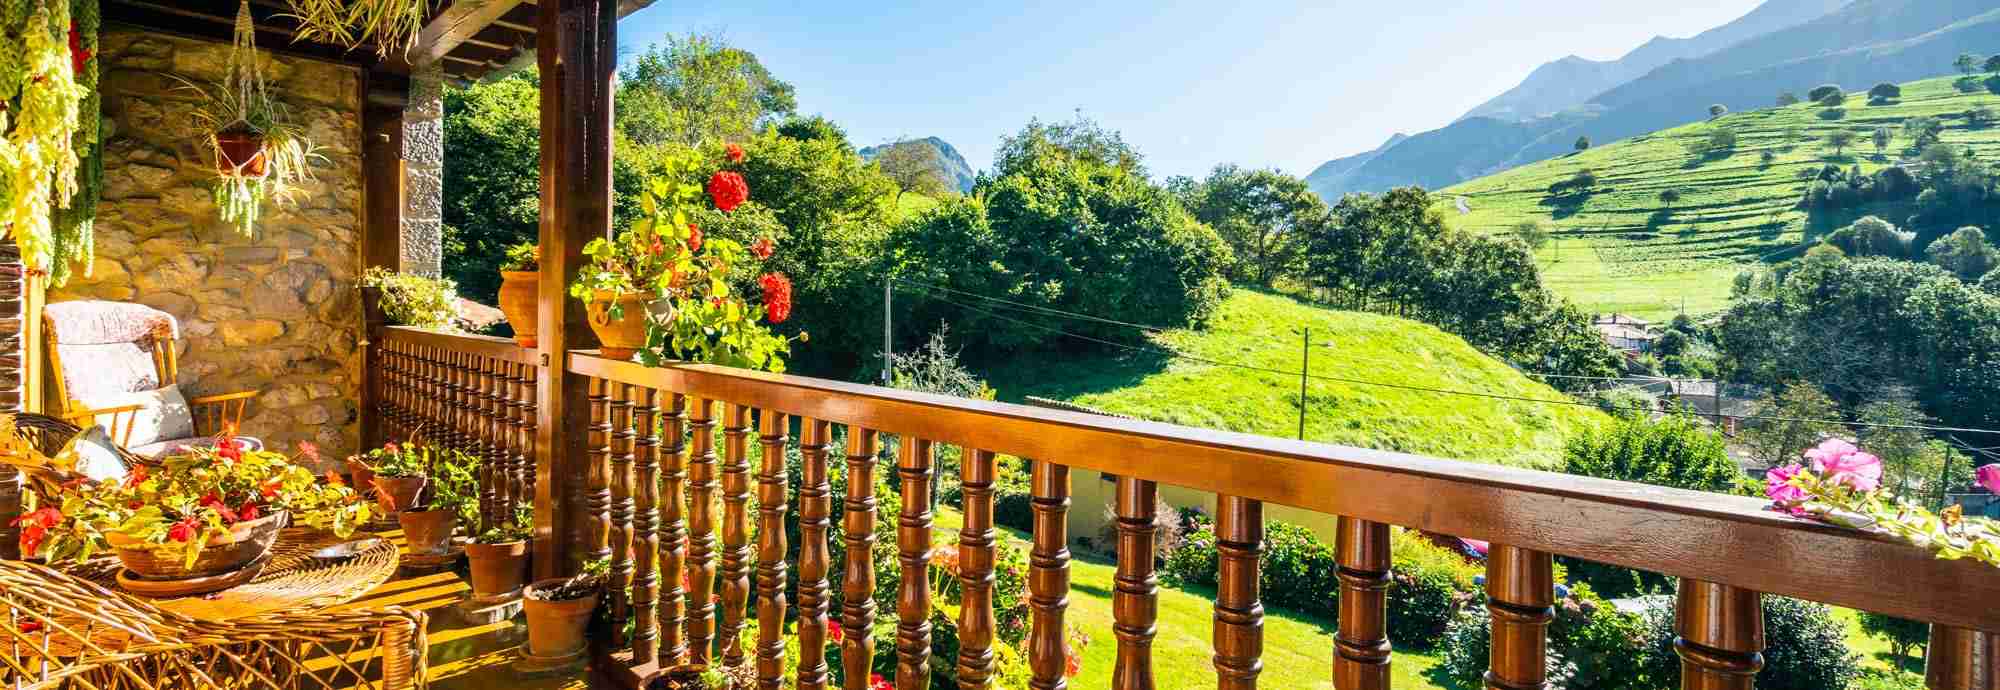 Exquisite Asturias cottage with mountain views 15 mins from beaches